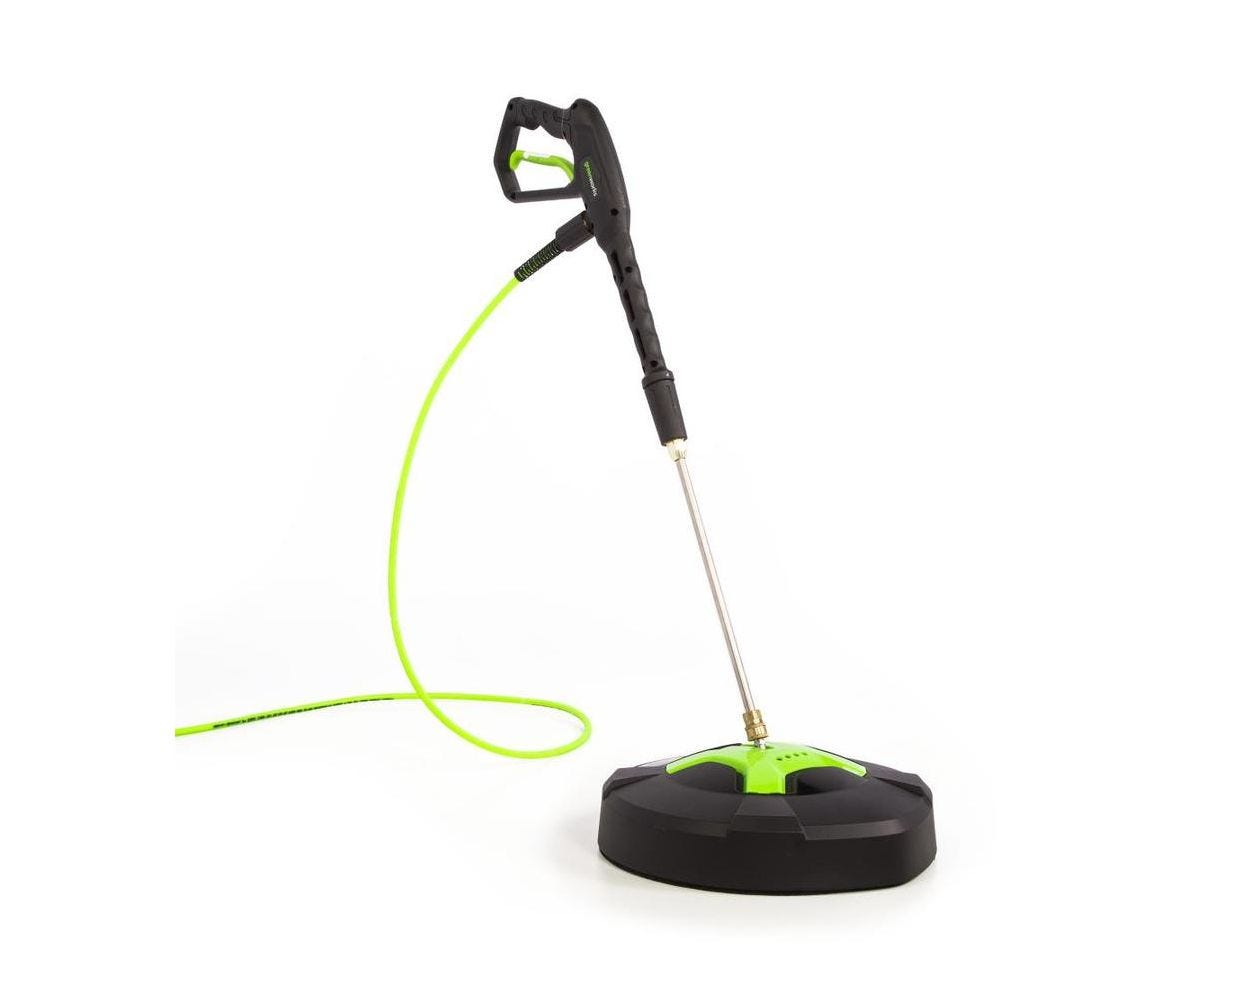 Universal 15-Inch Surface Cleaner | Greenworks